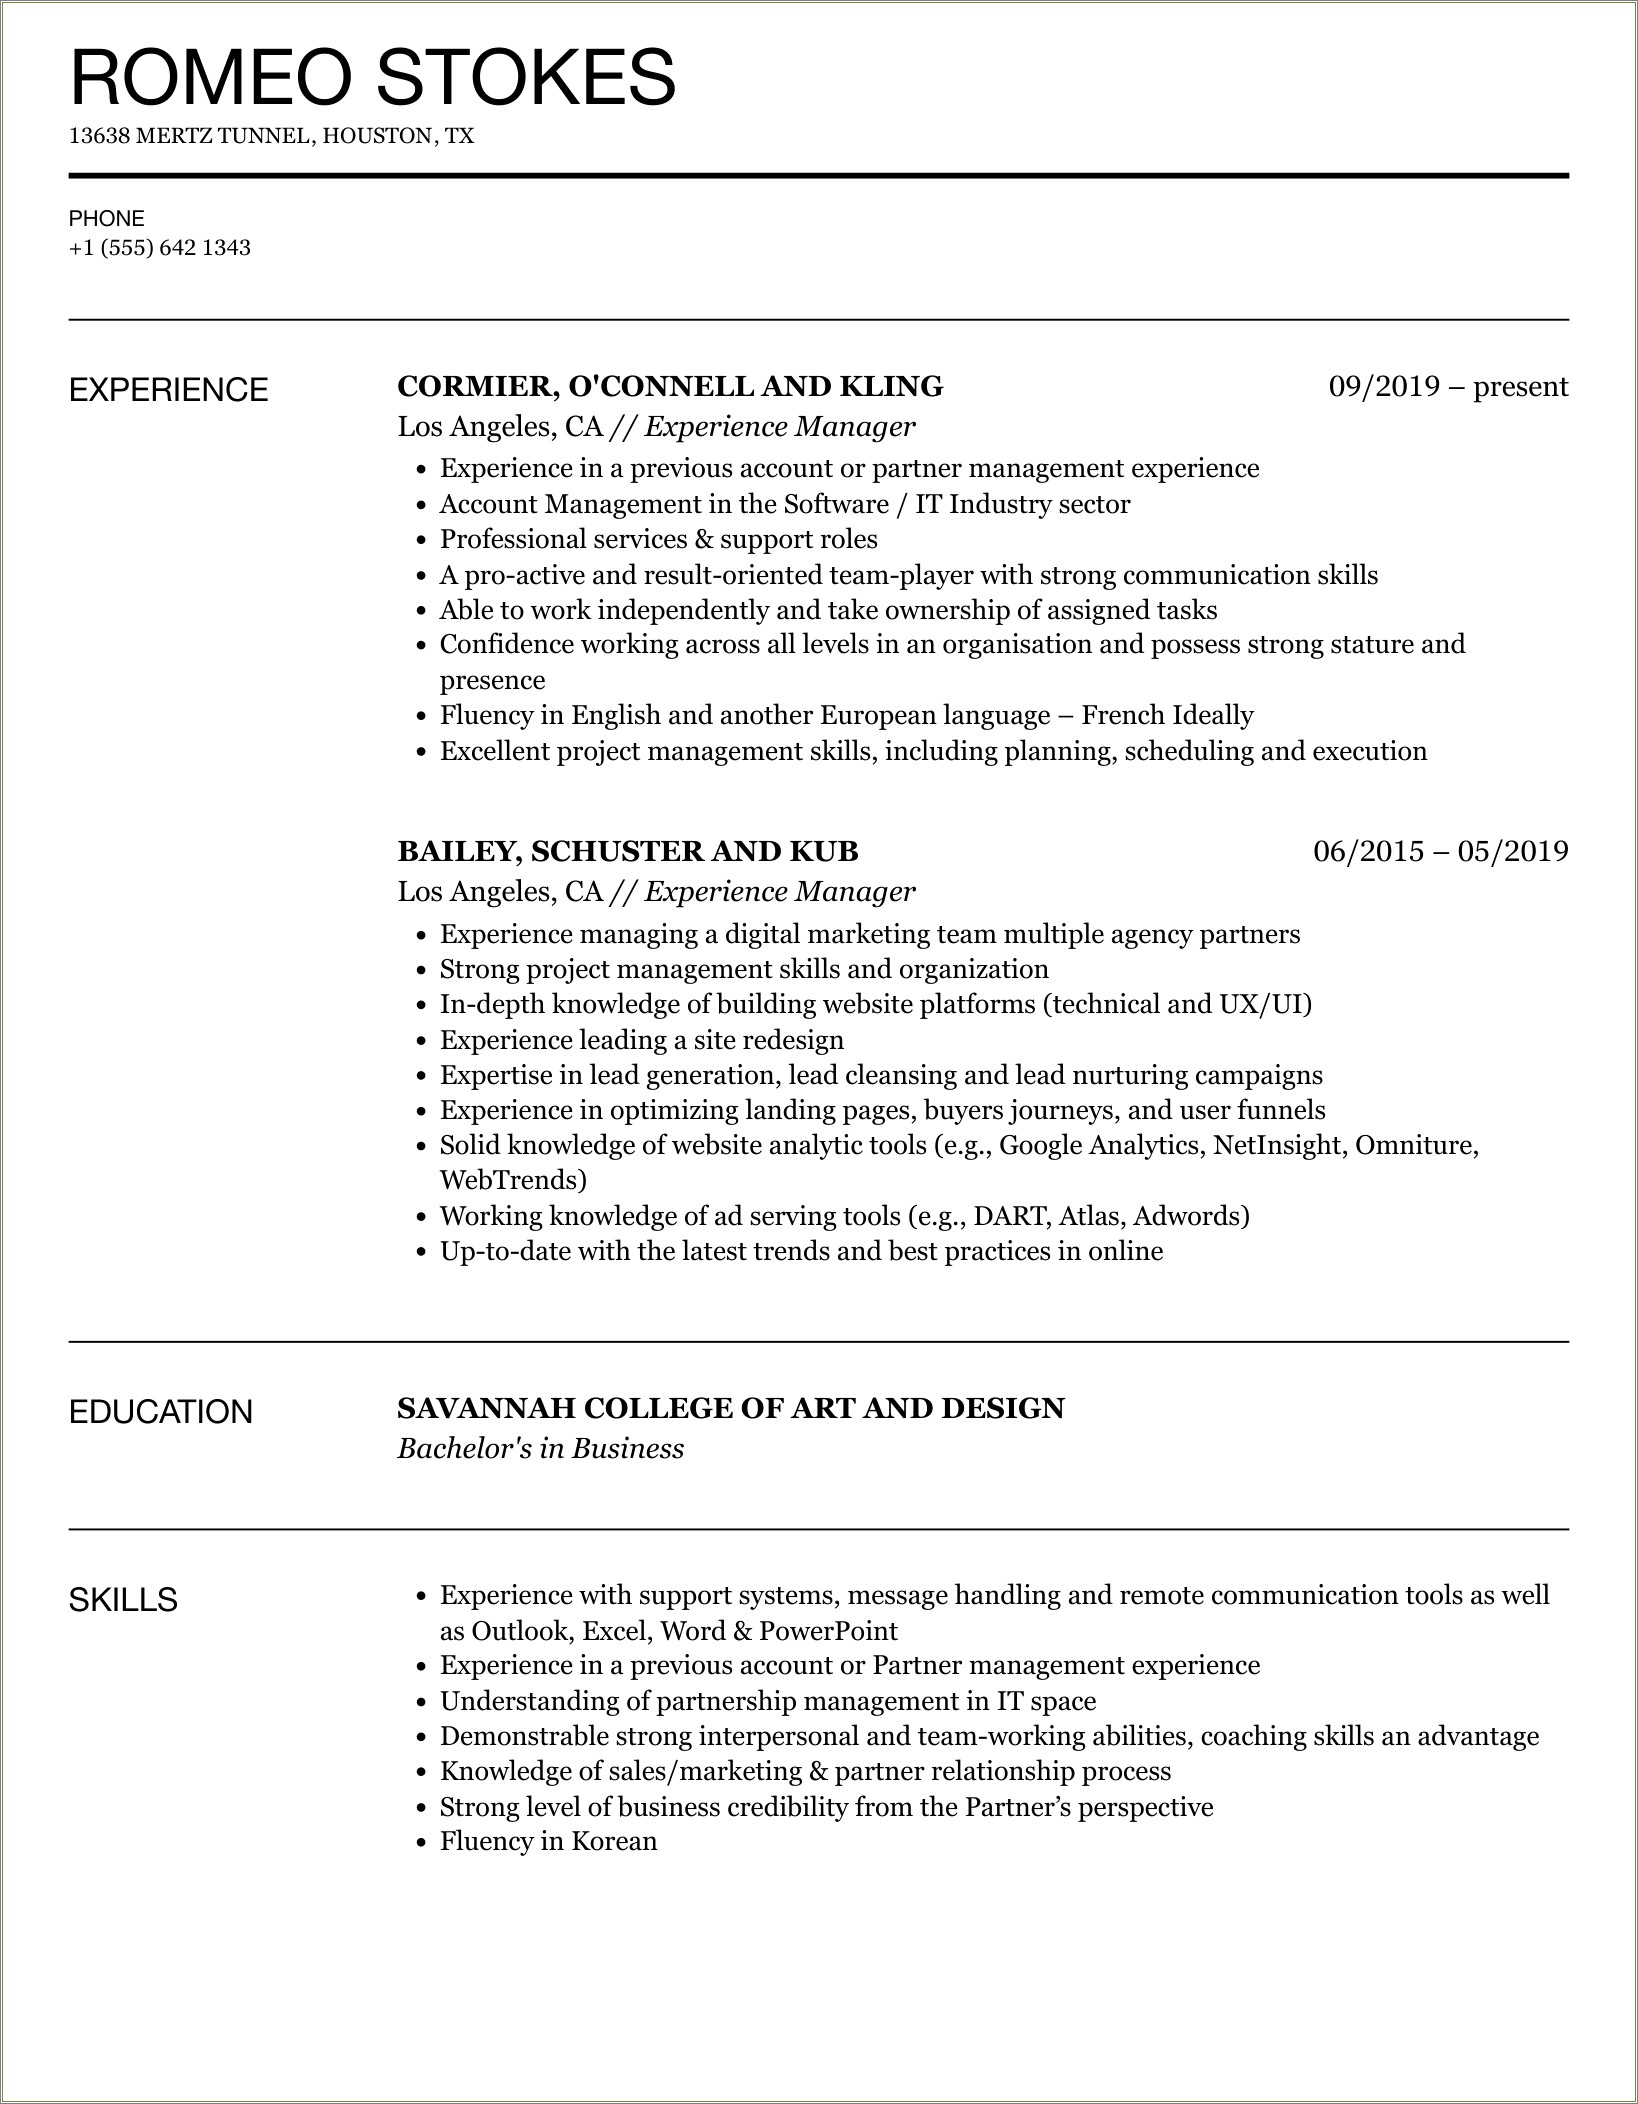 Resume For Mix Of Employee And Independent Experience